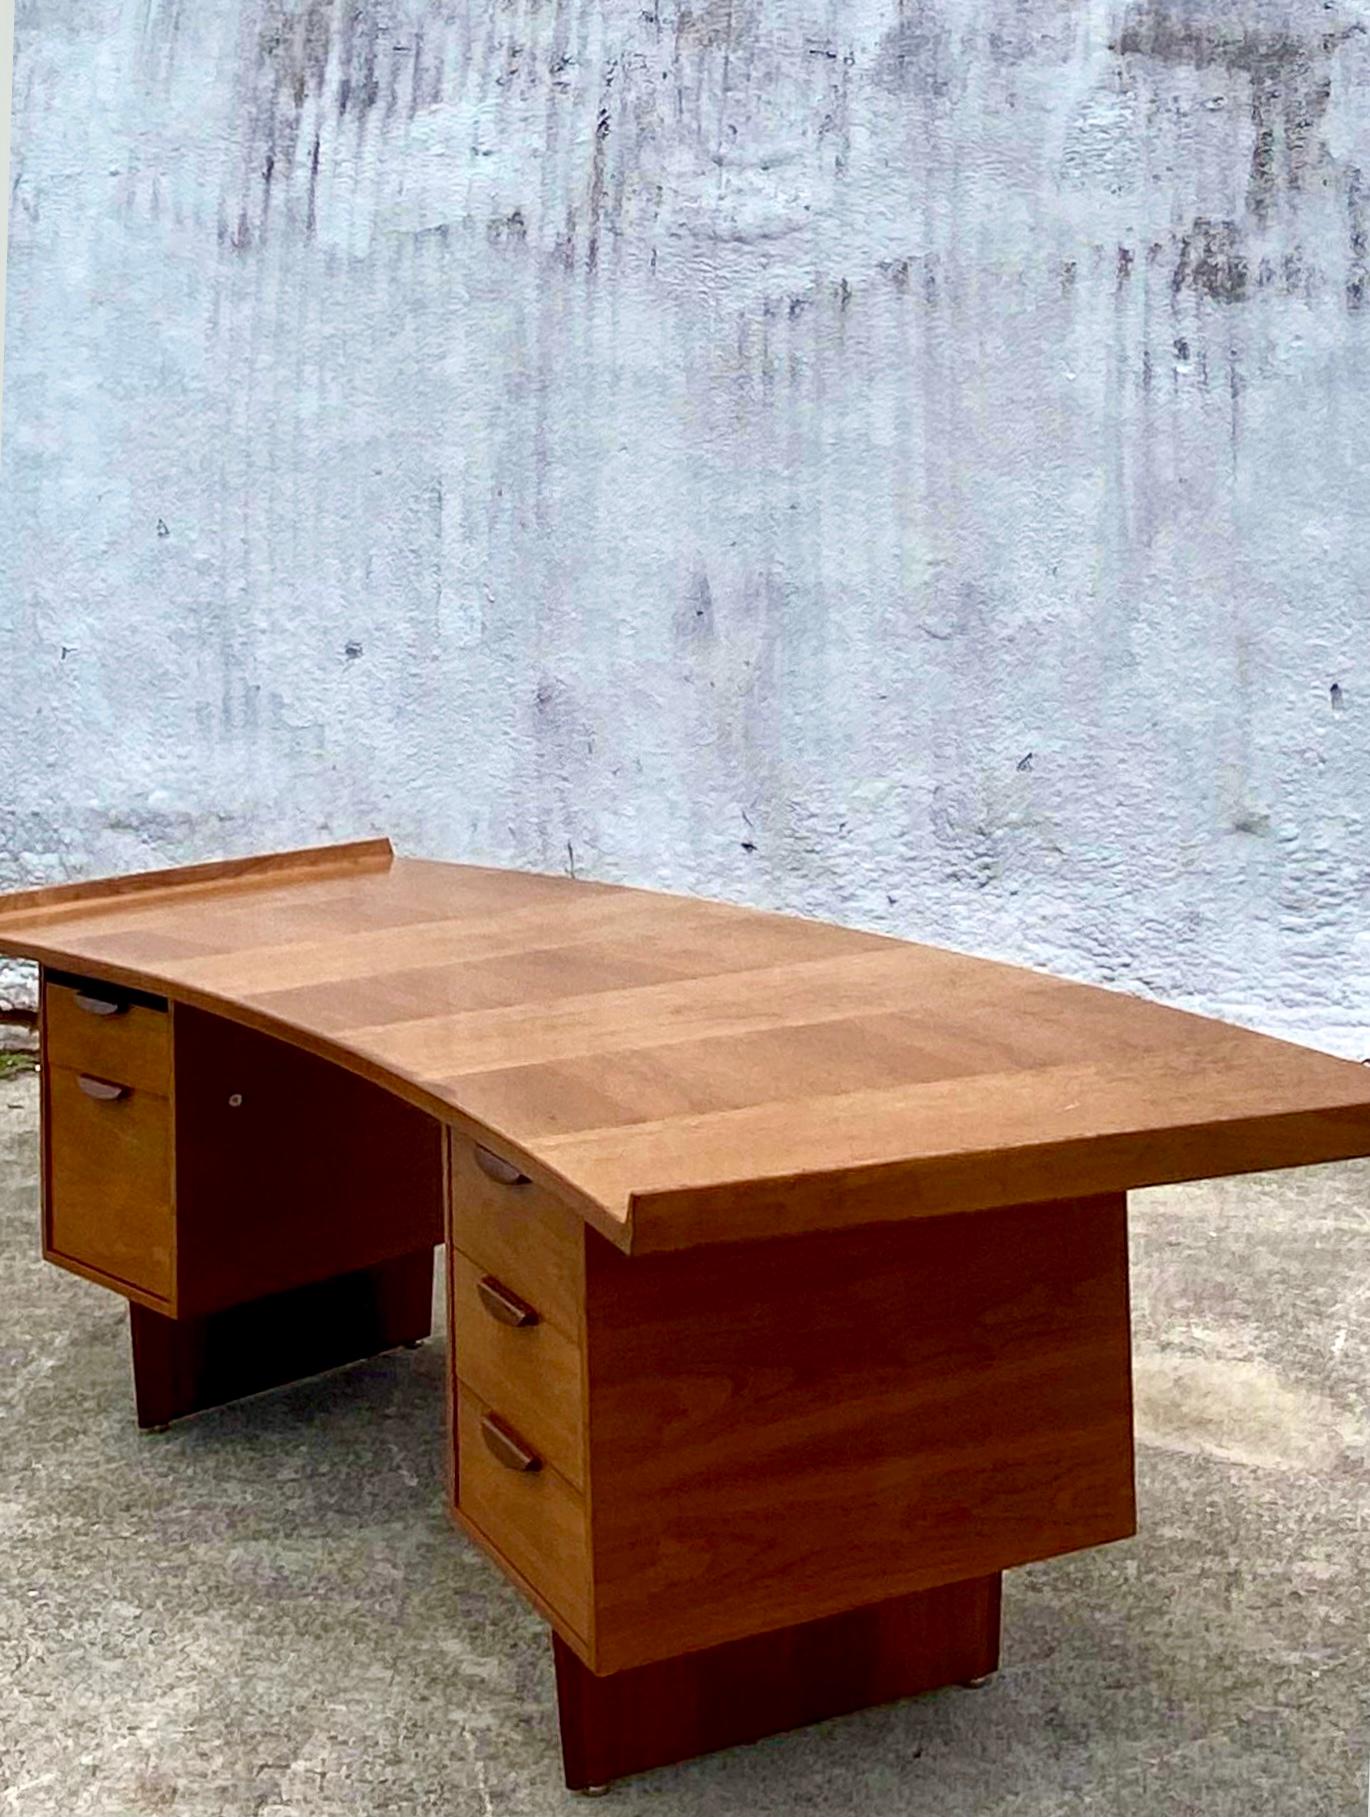 Spectacular Midcentury Harvey Probber executive desk. Impressive in size with a curved surfboard two tone top. Rests on slender blades to give the desk the appearance of floating. A real collectors piece. Acquired from a Hobe Sound estate.